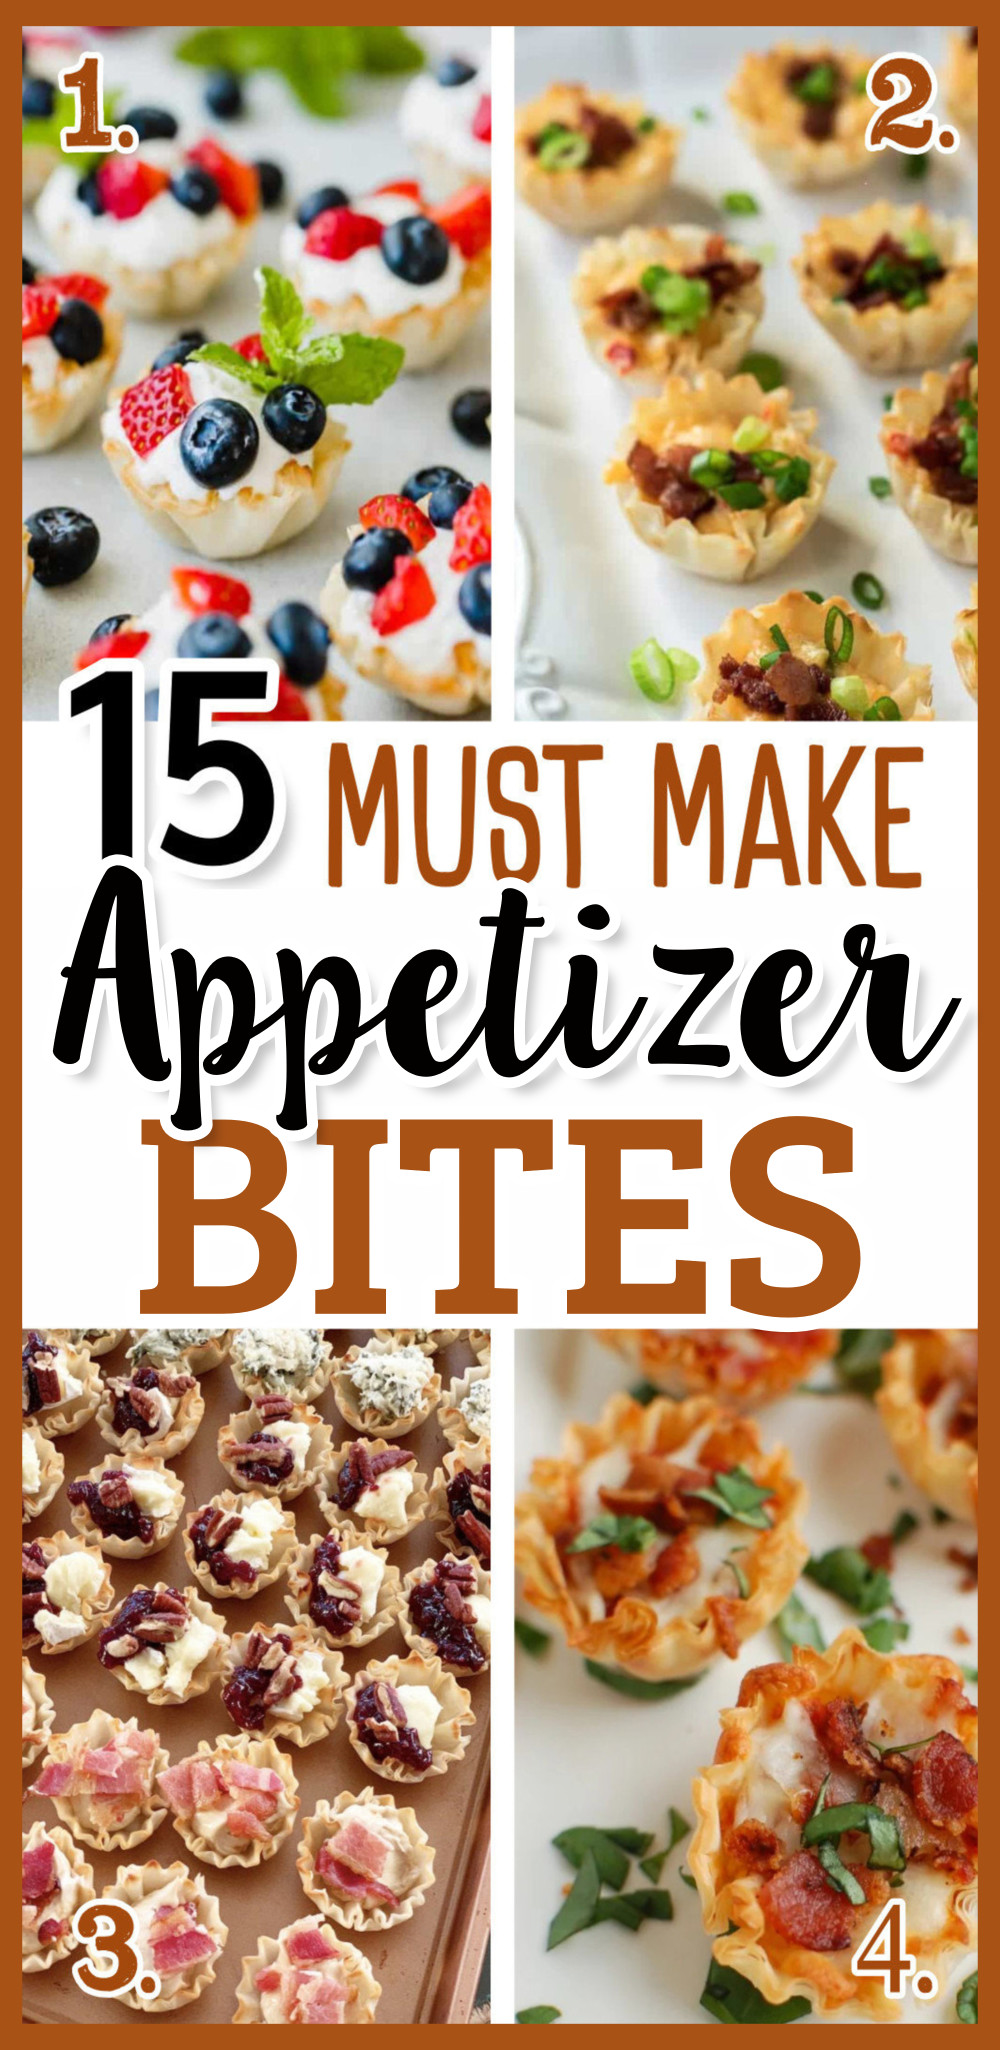 15 must make appetizers bites